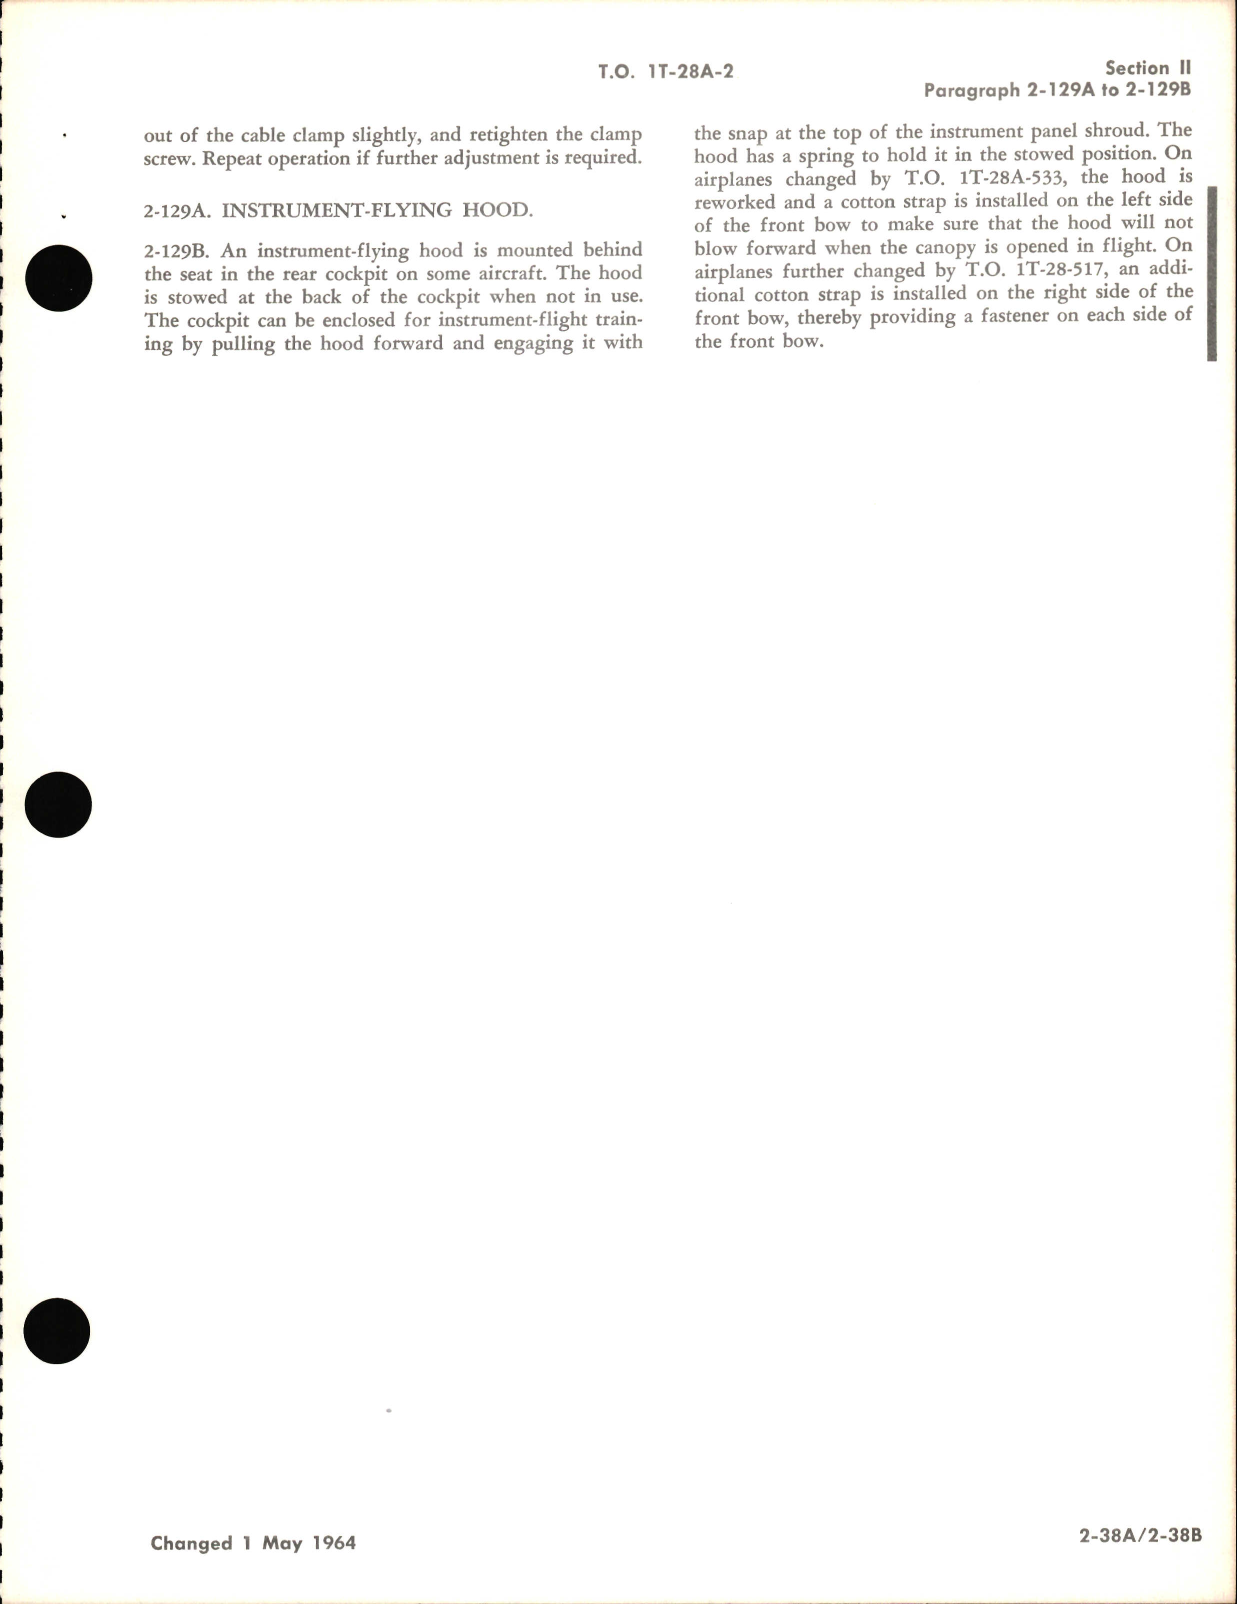 Sample page 7 from AirCorps Library document: Maintenance Manual for T-28A and T-28D